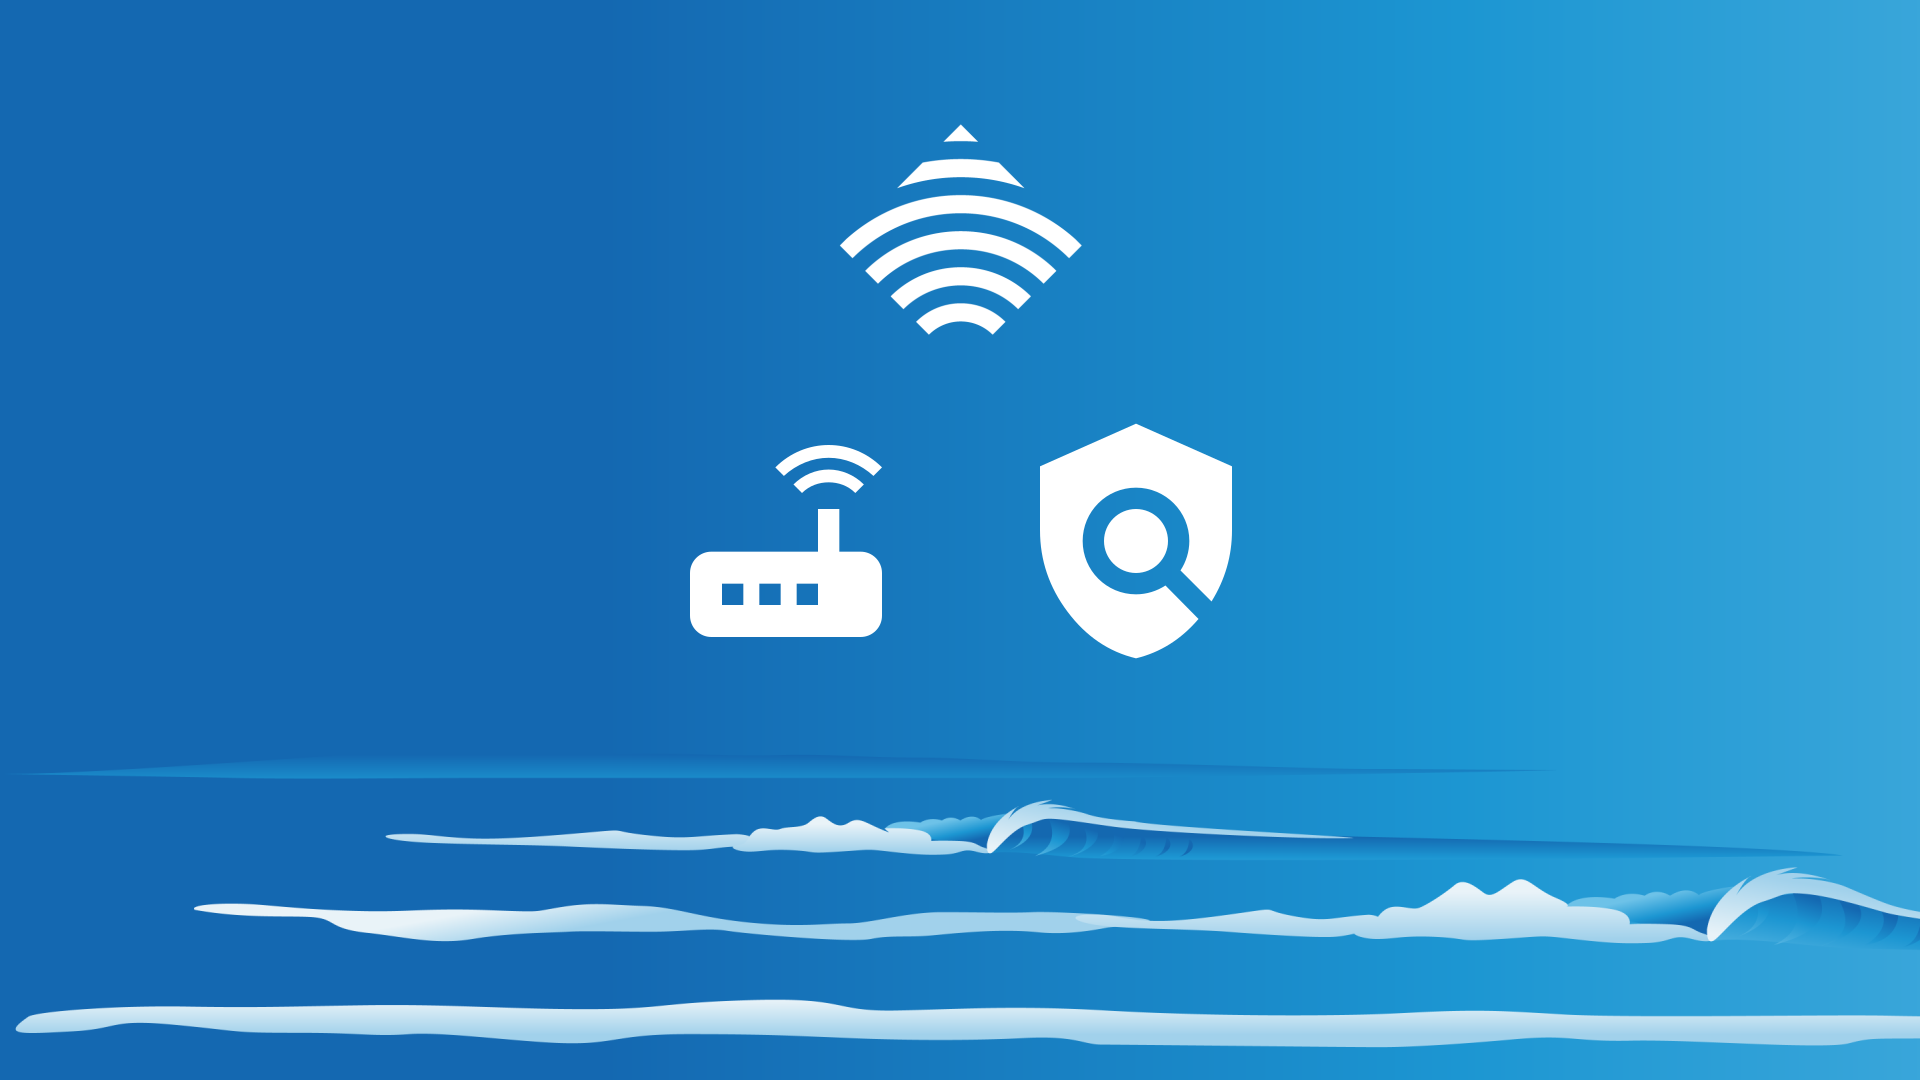 Sea background with Netcomm logo and wireless router icon